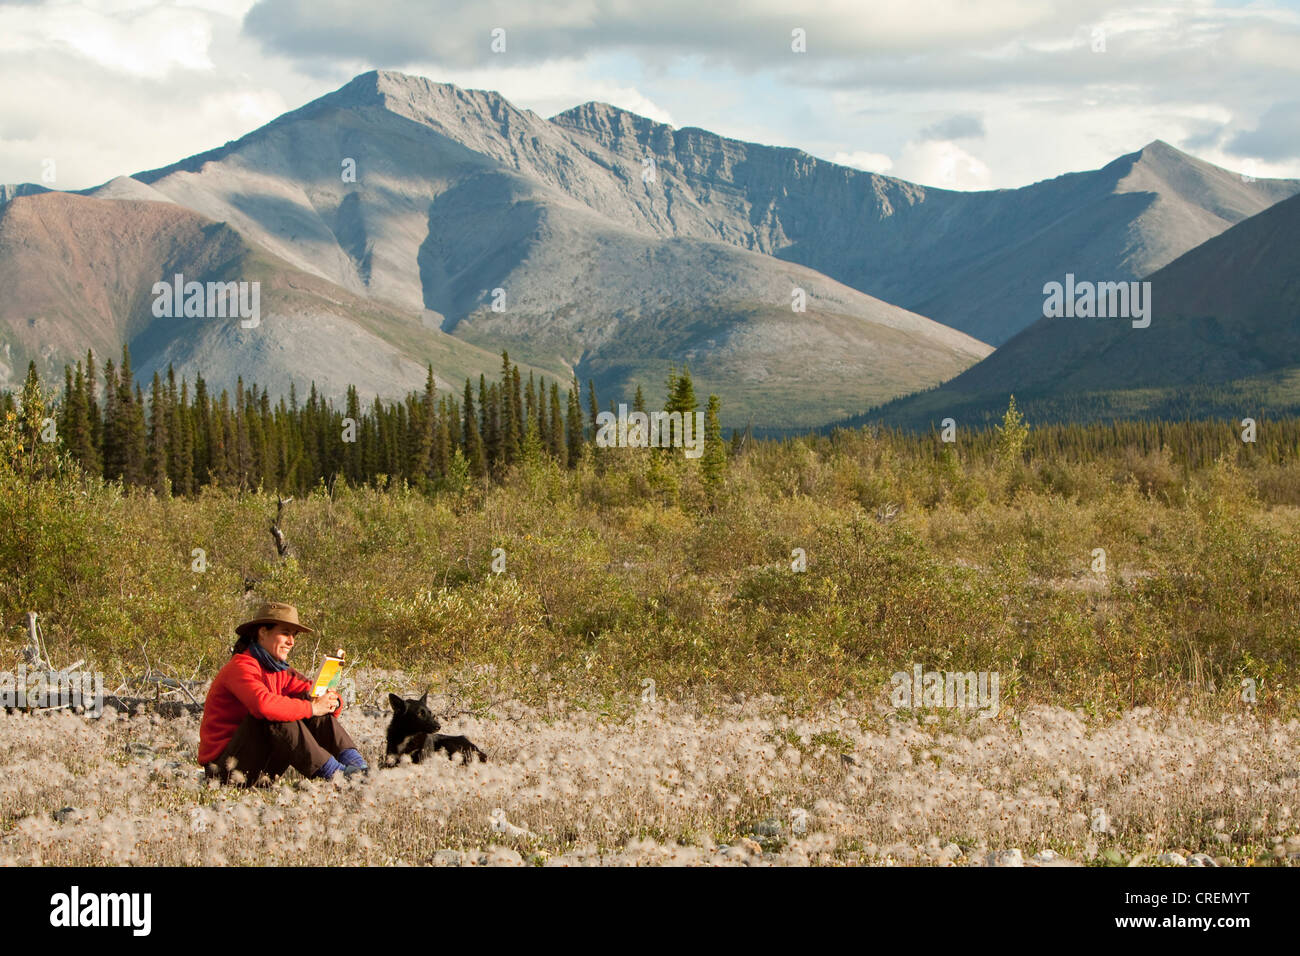 Young woman reading a book, relaxing, sitting in the grass, her dog, an Alaskan Husky, beside her, Cotton Grass, Peel Watershed, Stock Photo